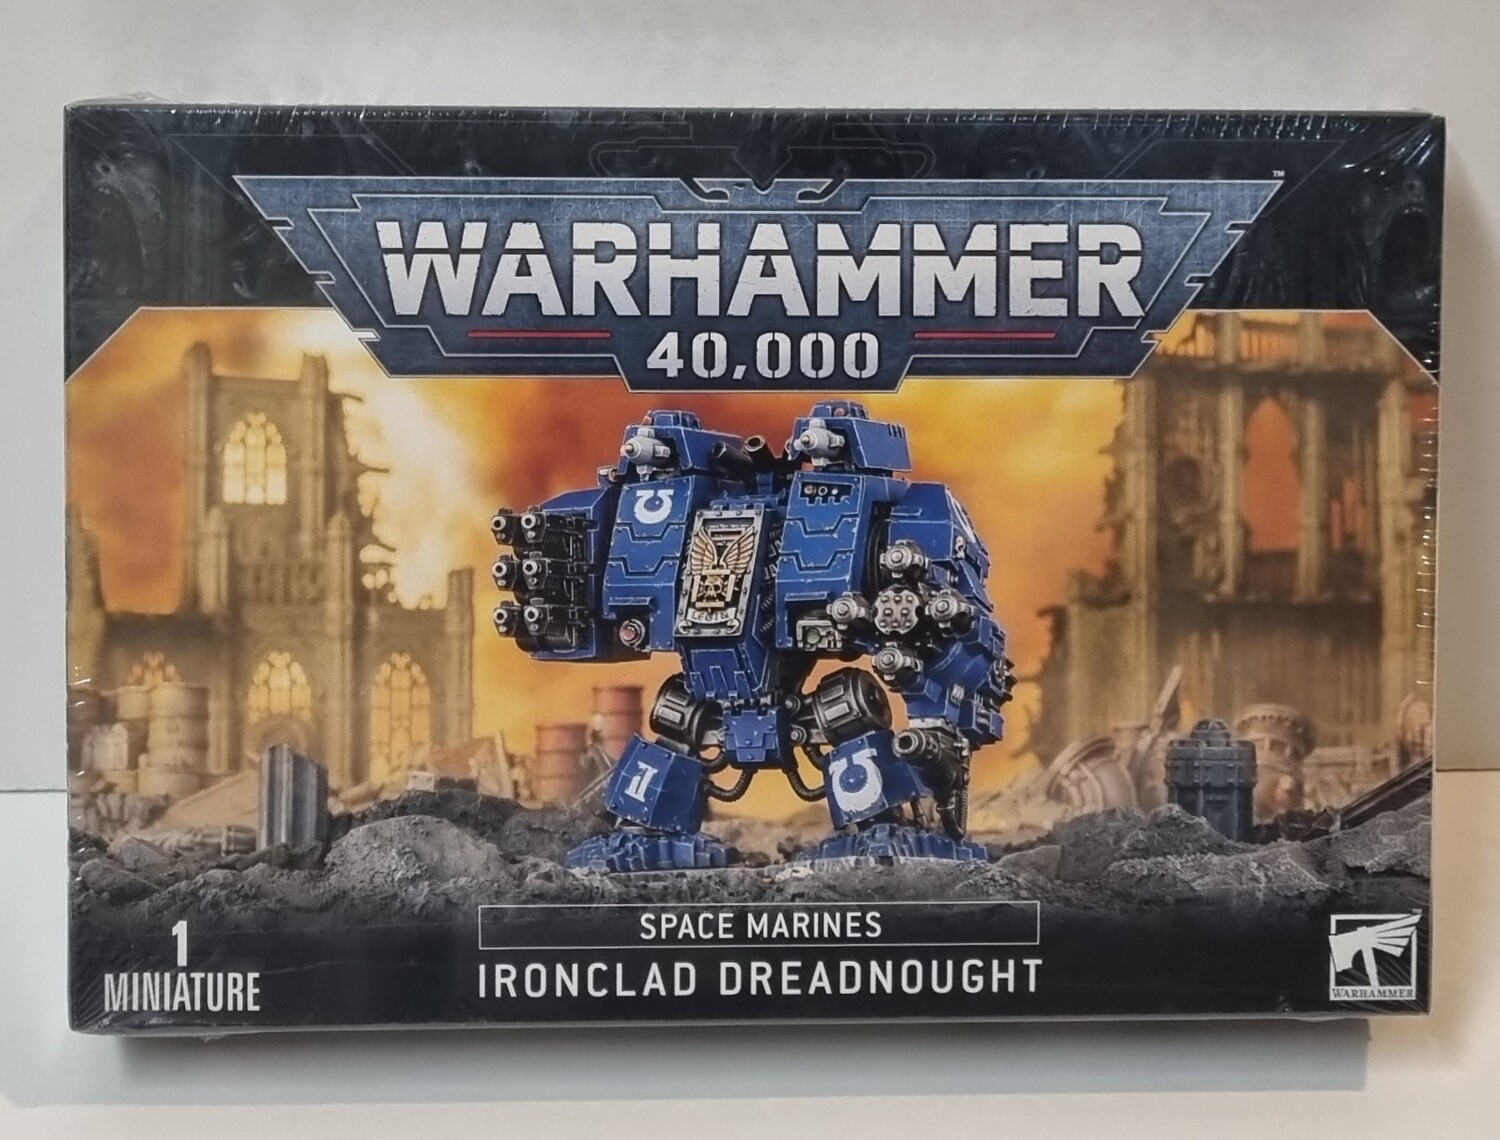 Warhammer, 40k, 48-46, Space Marines: Ironclad Dreadnought